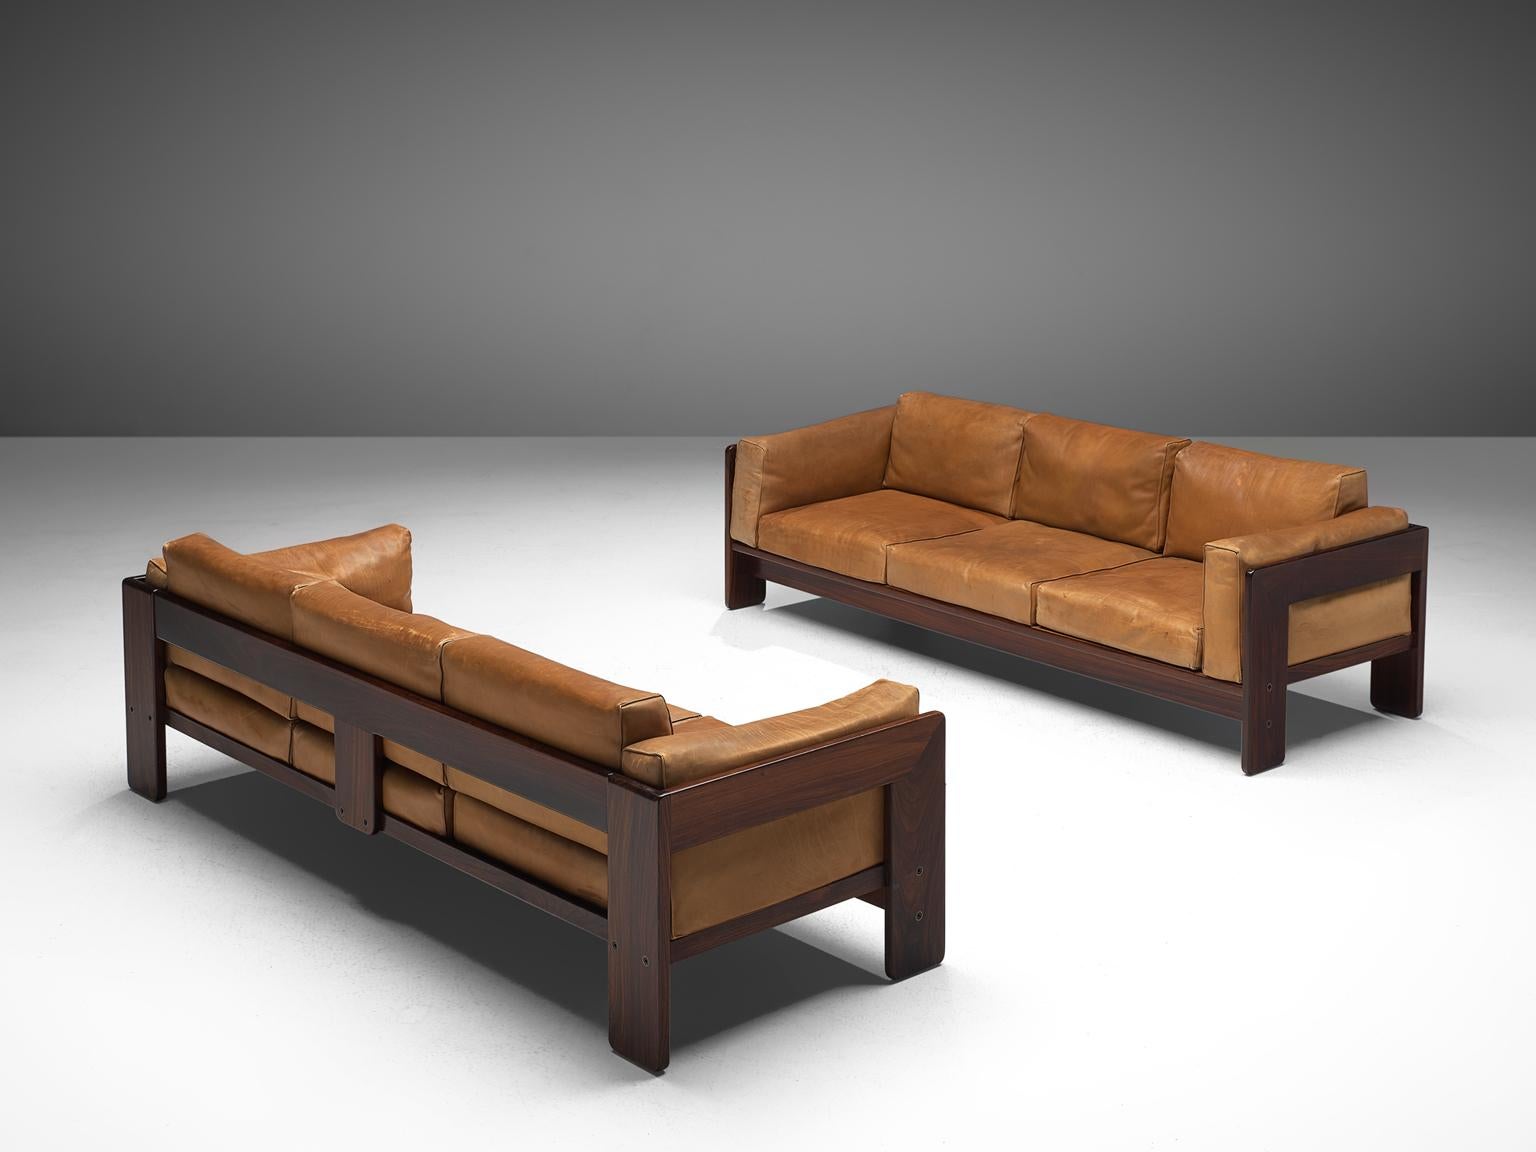 Italian Tobia Scarpa 'Bastiano' Living Room Set in Rosewood and Cognac Leather